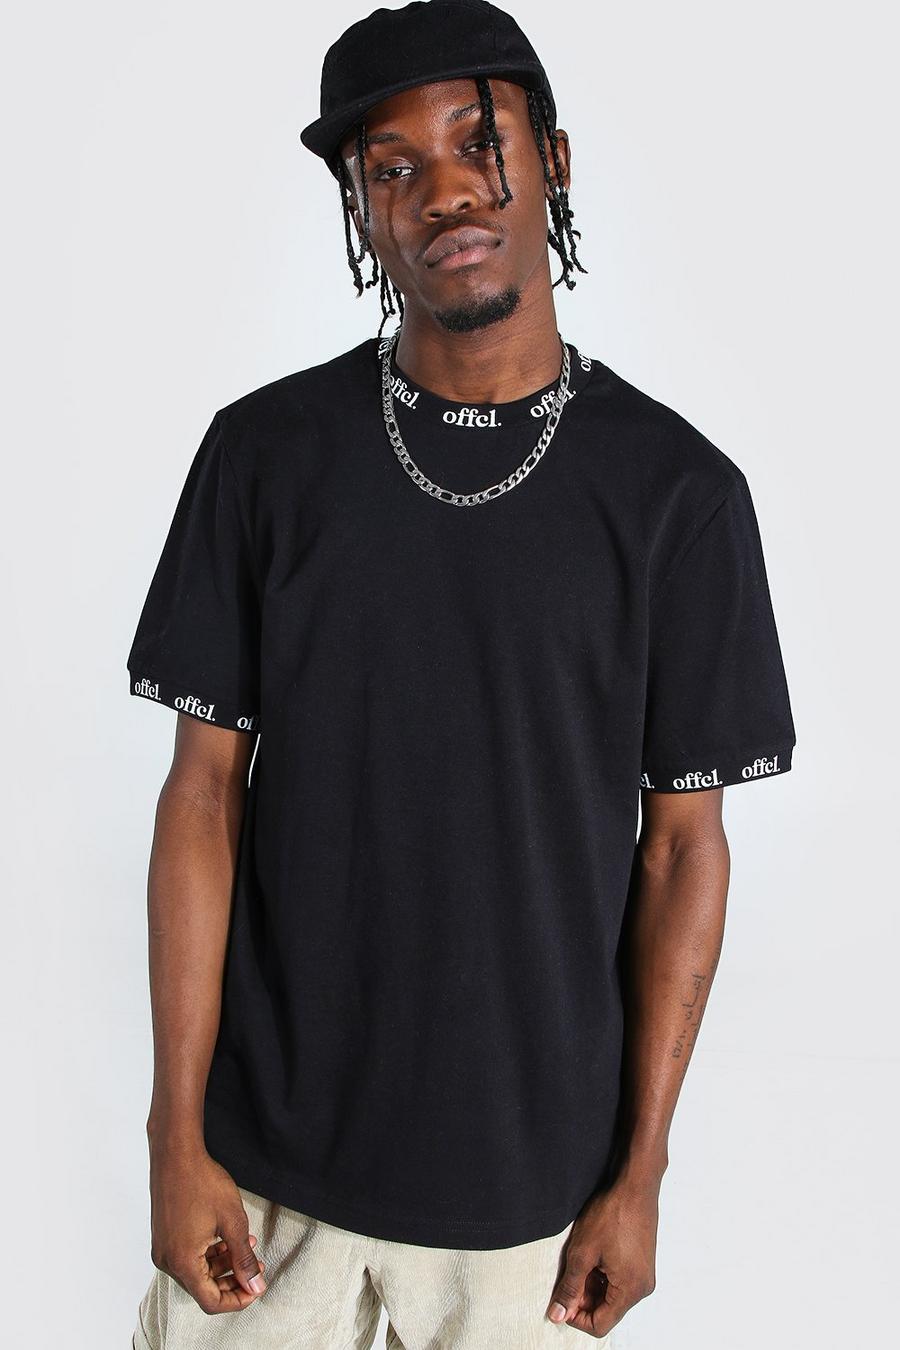 Black Offcl Neck And Cuff Graphic T-Shirt image number 1